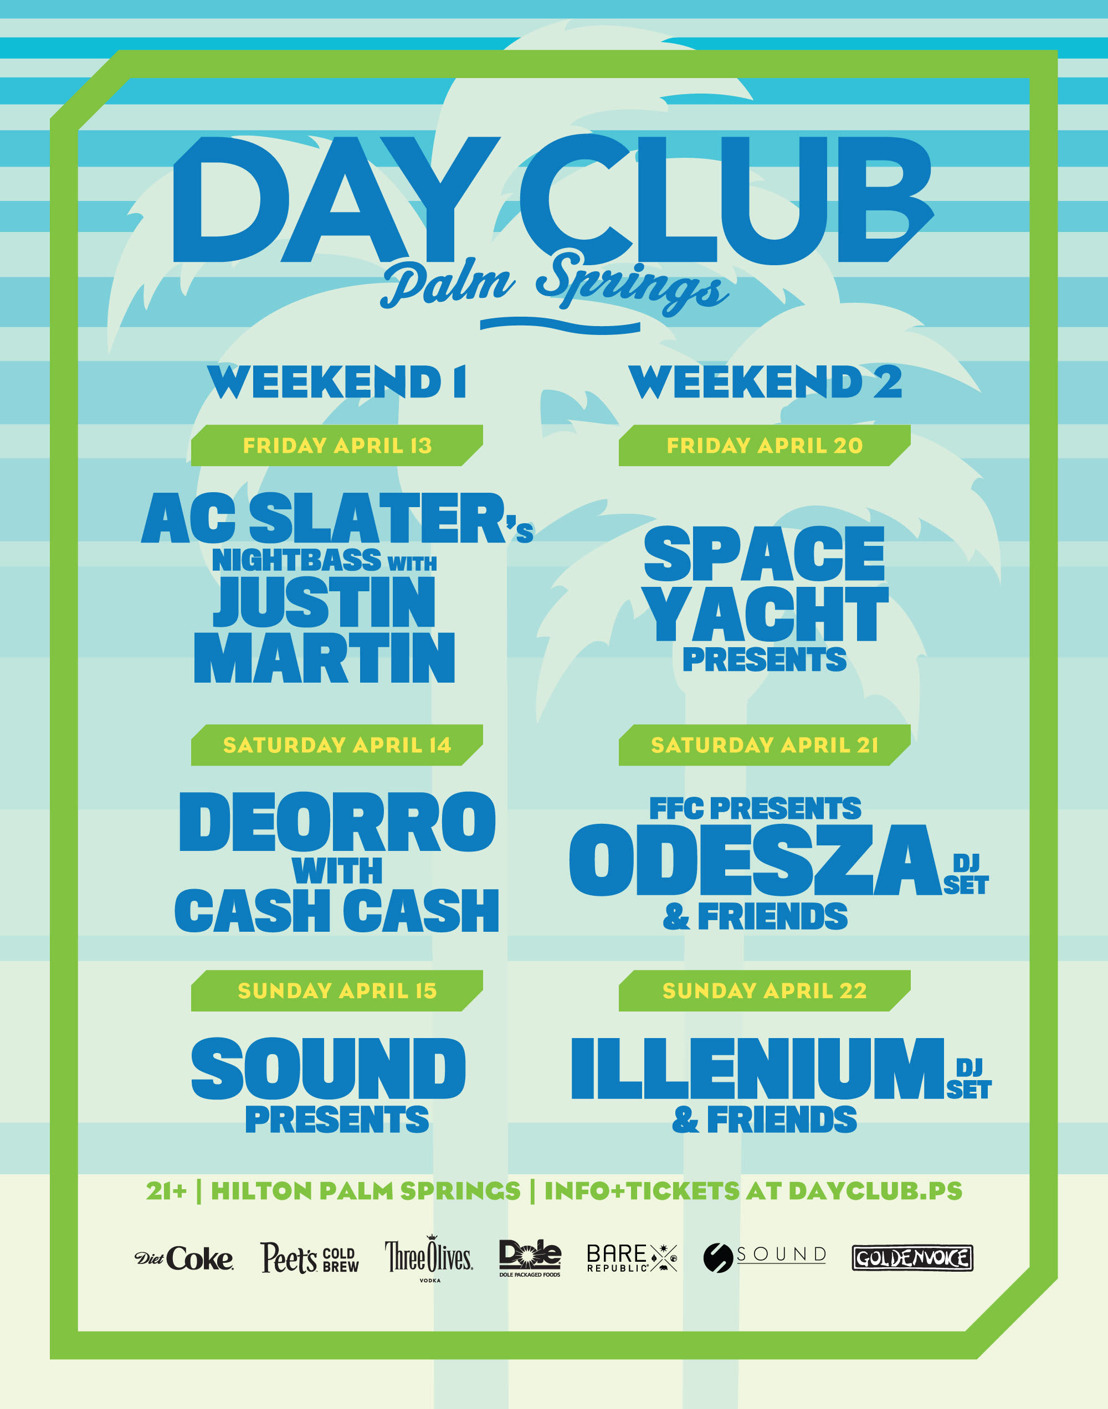 Get Coachella Ready With Day Club Palm Springs’ Ultimate Pool Parties Featuring ODESZA, Illenium, & More